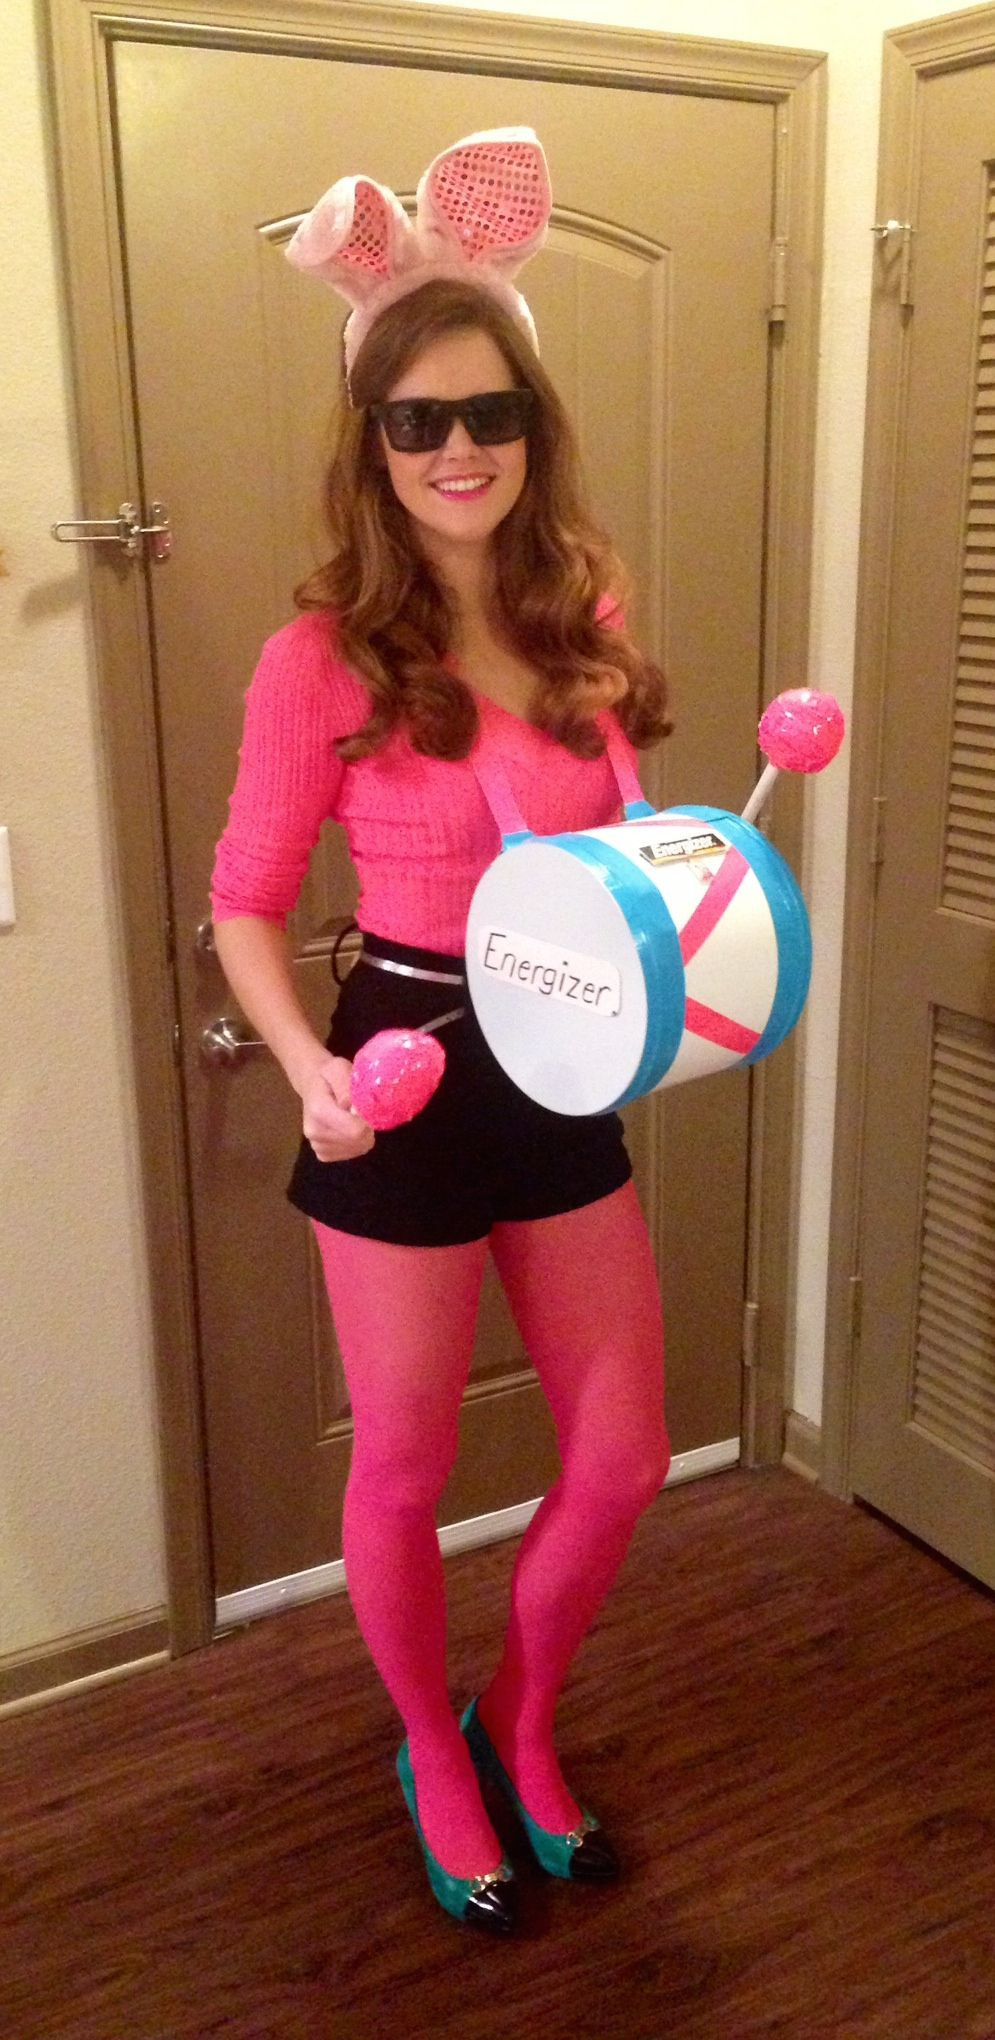 DIY Bunny Costume For Adults
 DIY Energizer bunny costume click to see 10 more last